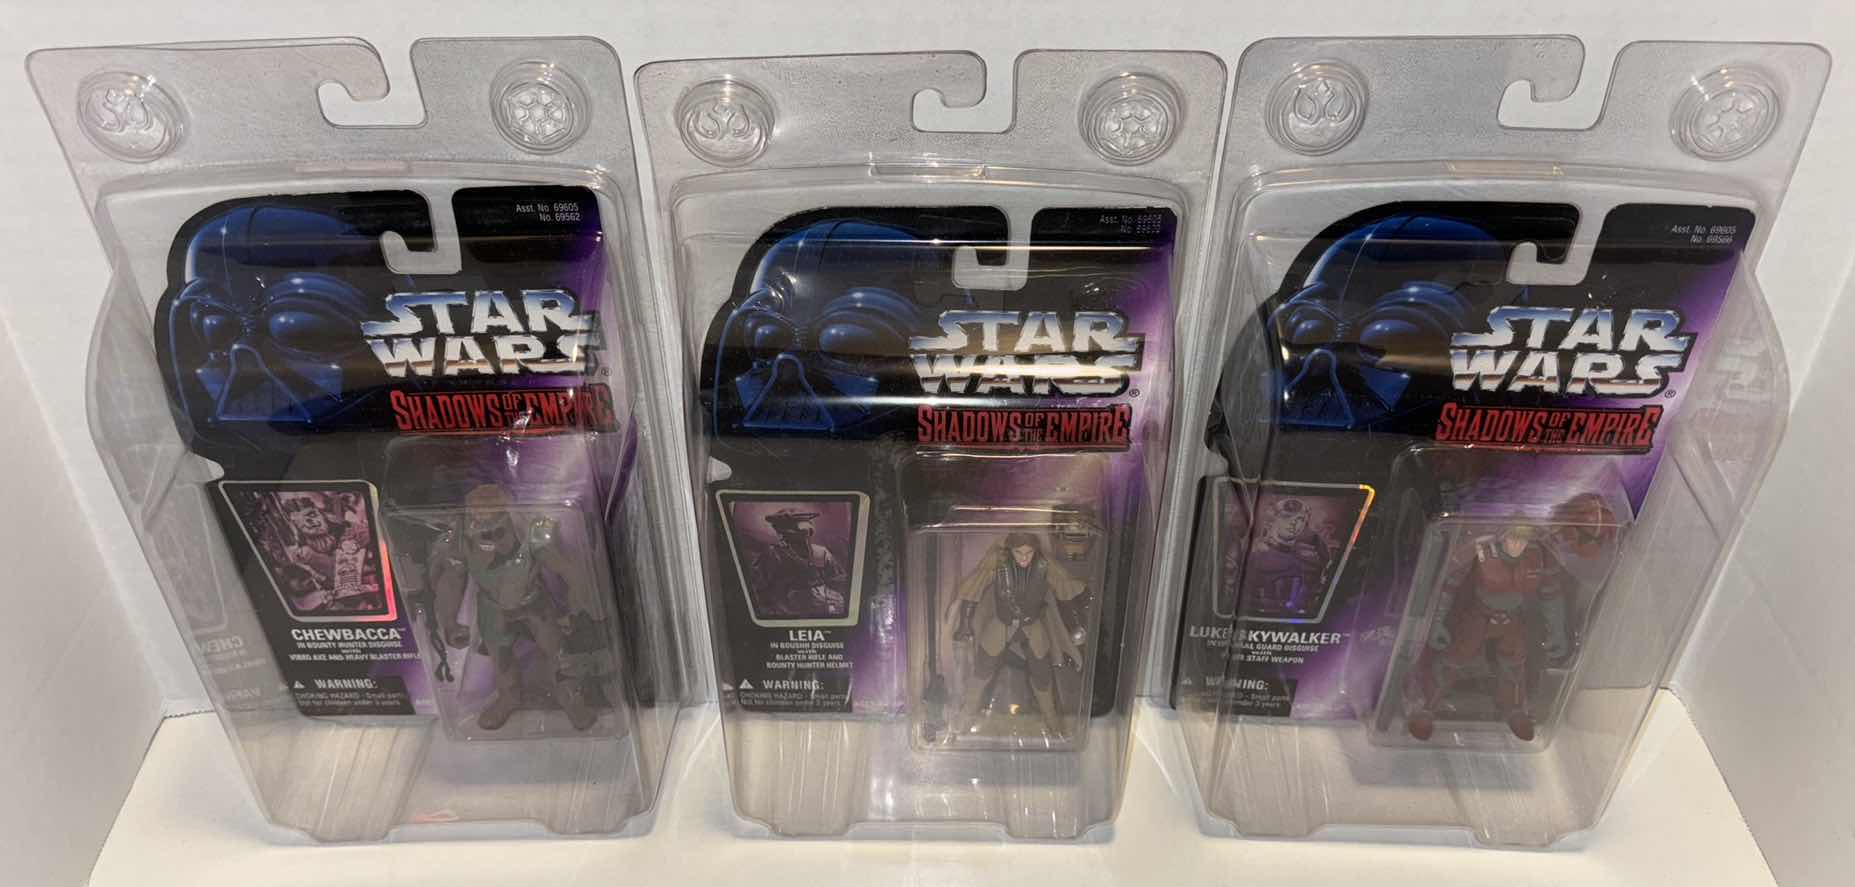 Photo 6 of NEW MINT COND 1996 HASBRO KENNER STAR WARS 3-PACK BUNDLE, SHADOWS OF THE EMPIRE “CHEWBACCA”, “LEIA” & “LUKE SKYWALKER” IN CLEAR CLAMSHELL PACKAGING